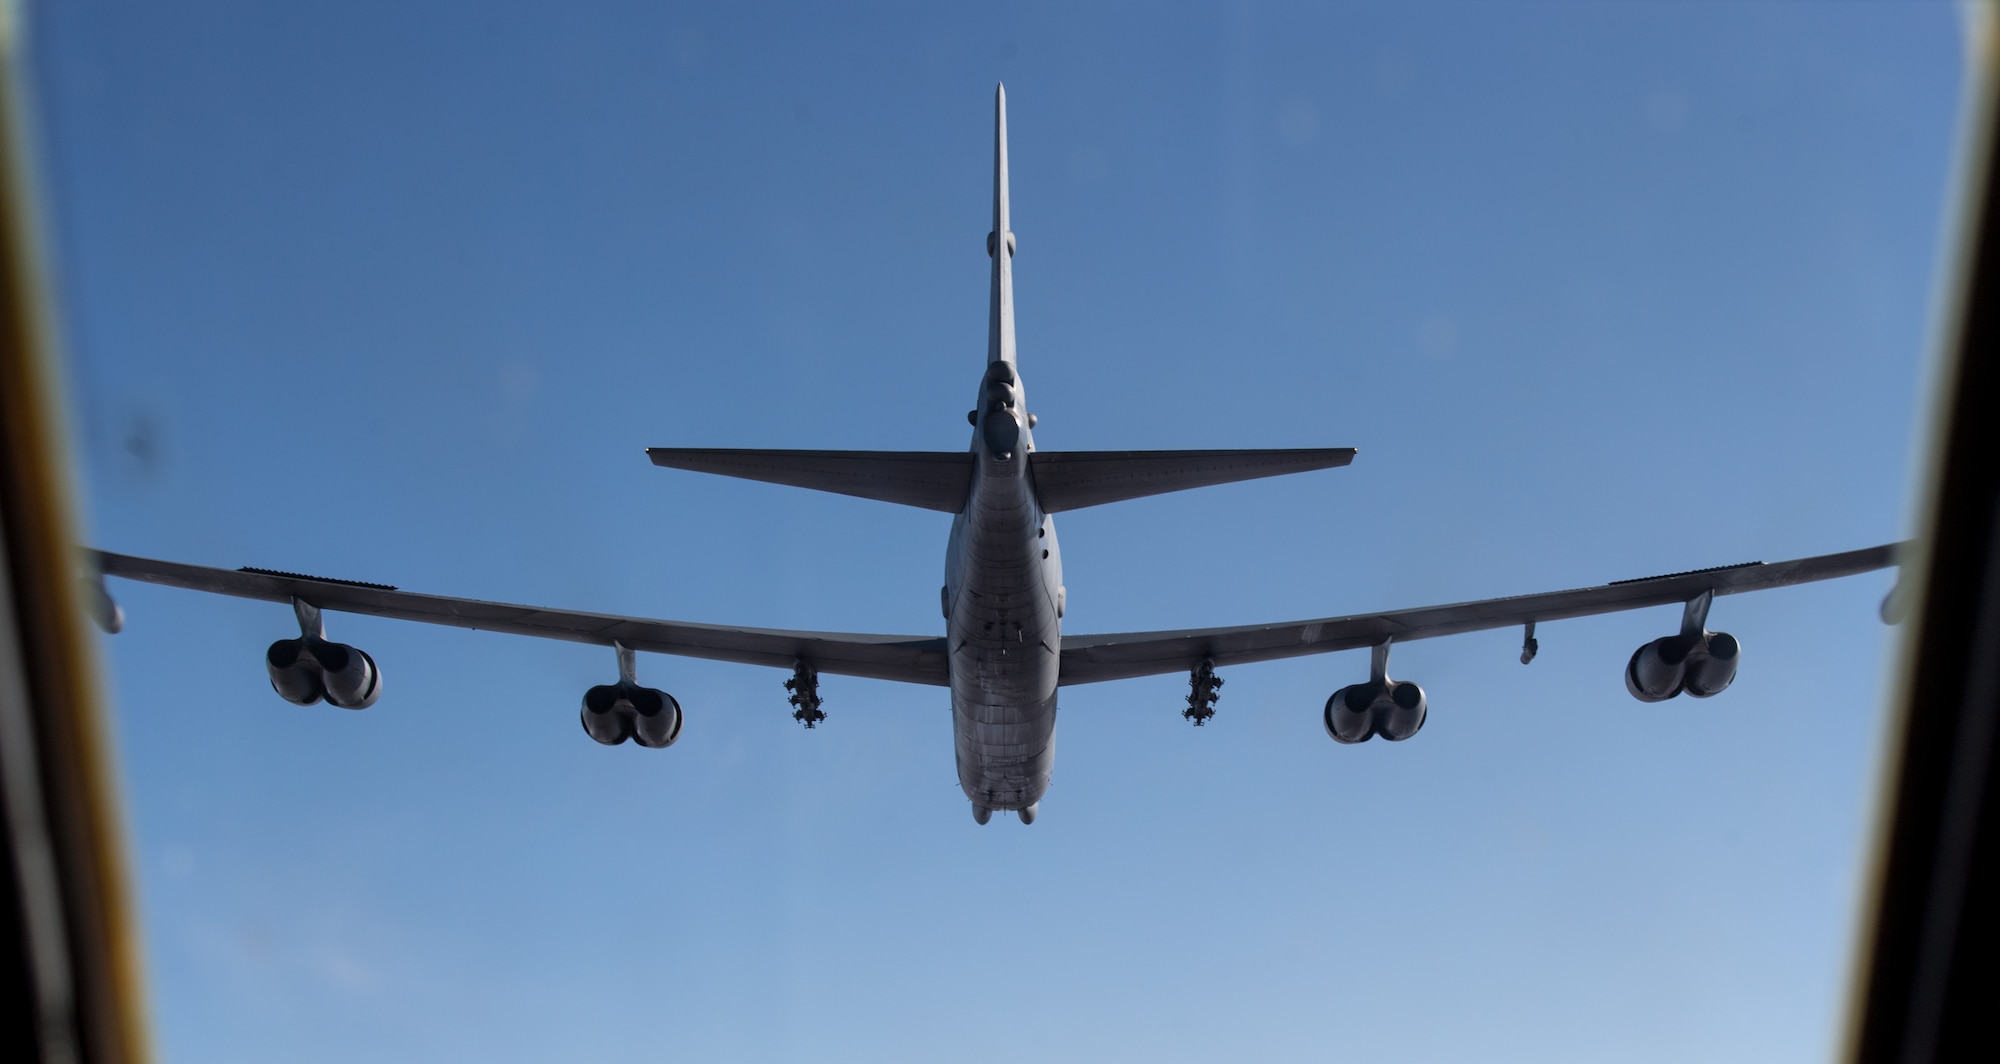 A B-52H Stratofortress from Barksdale Air Force Base, La., flies to South Dakota Nov. 21, 2019.  The exercise simulated a scenario where B-52s were launched from multiple locations to strike the same target areas.  (U.S. Air Force photo by Airman 1st Class Lillian Miller)